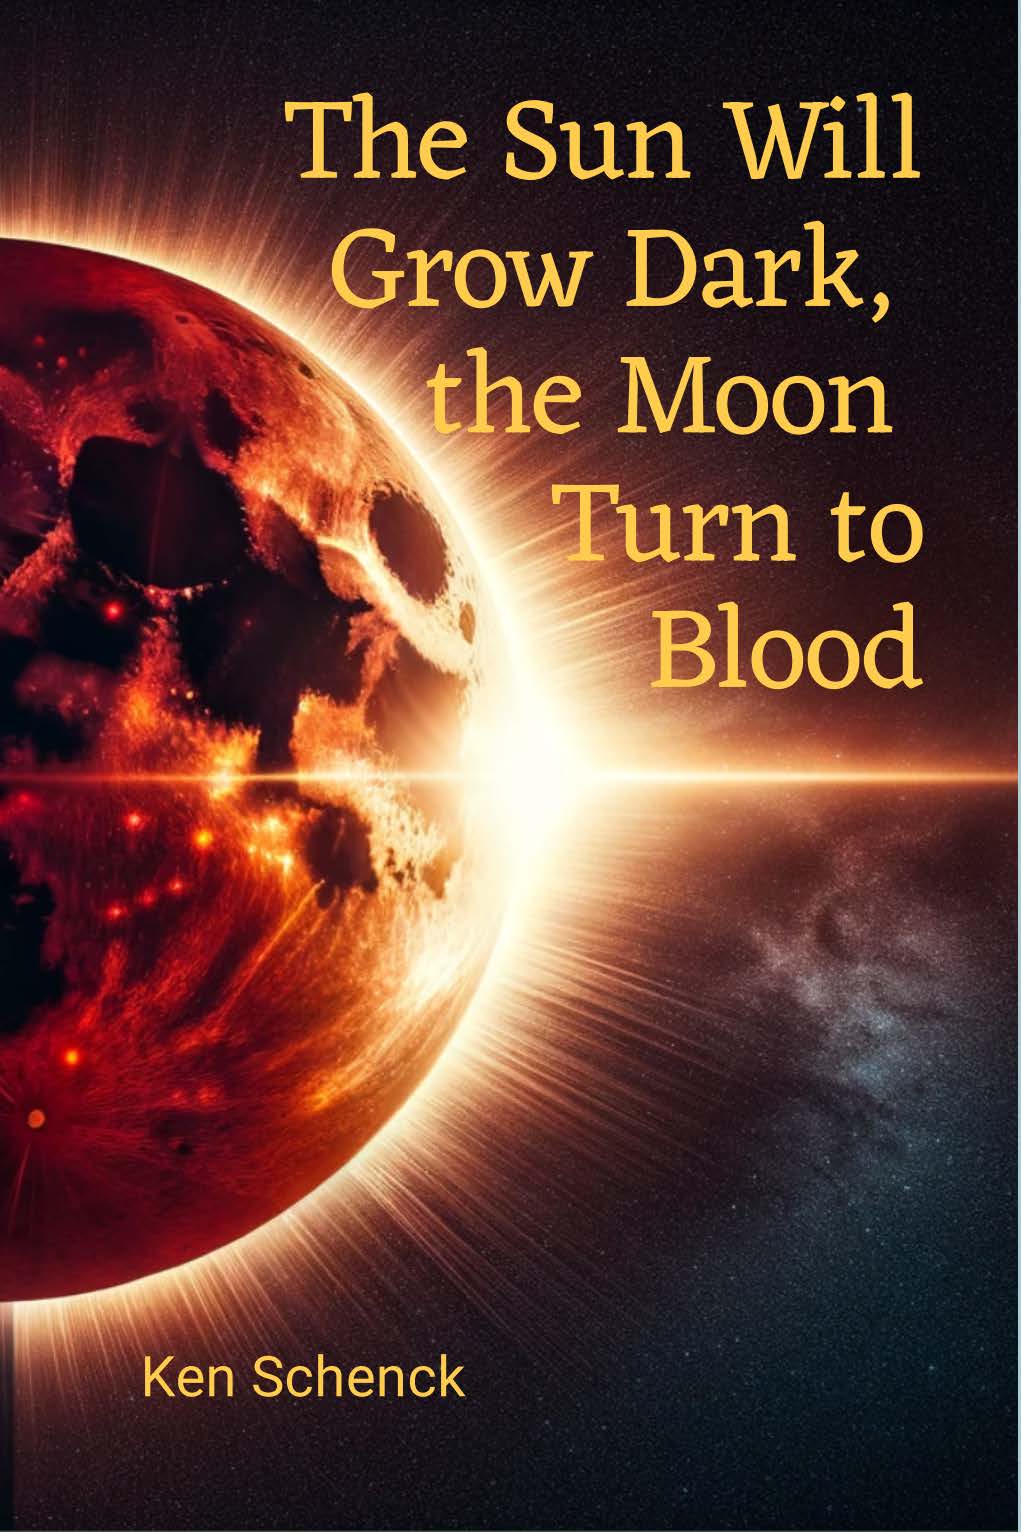 The Sun Will Go Dark, the Moon Turn to Blood (paperback)